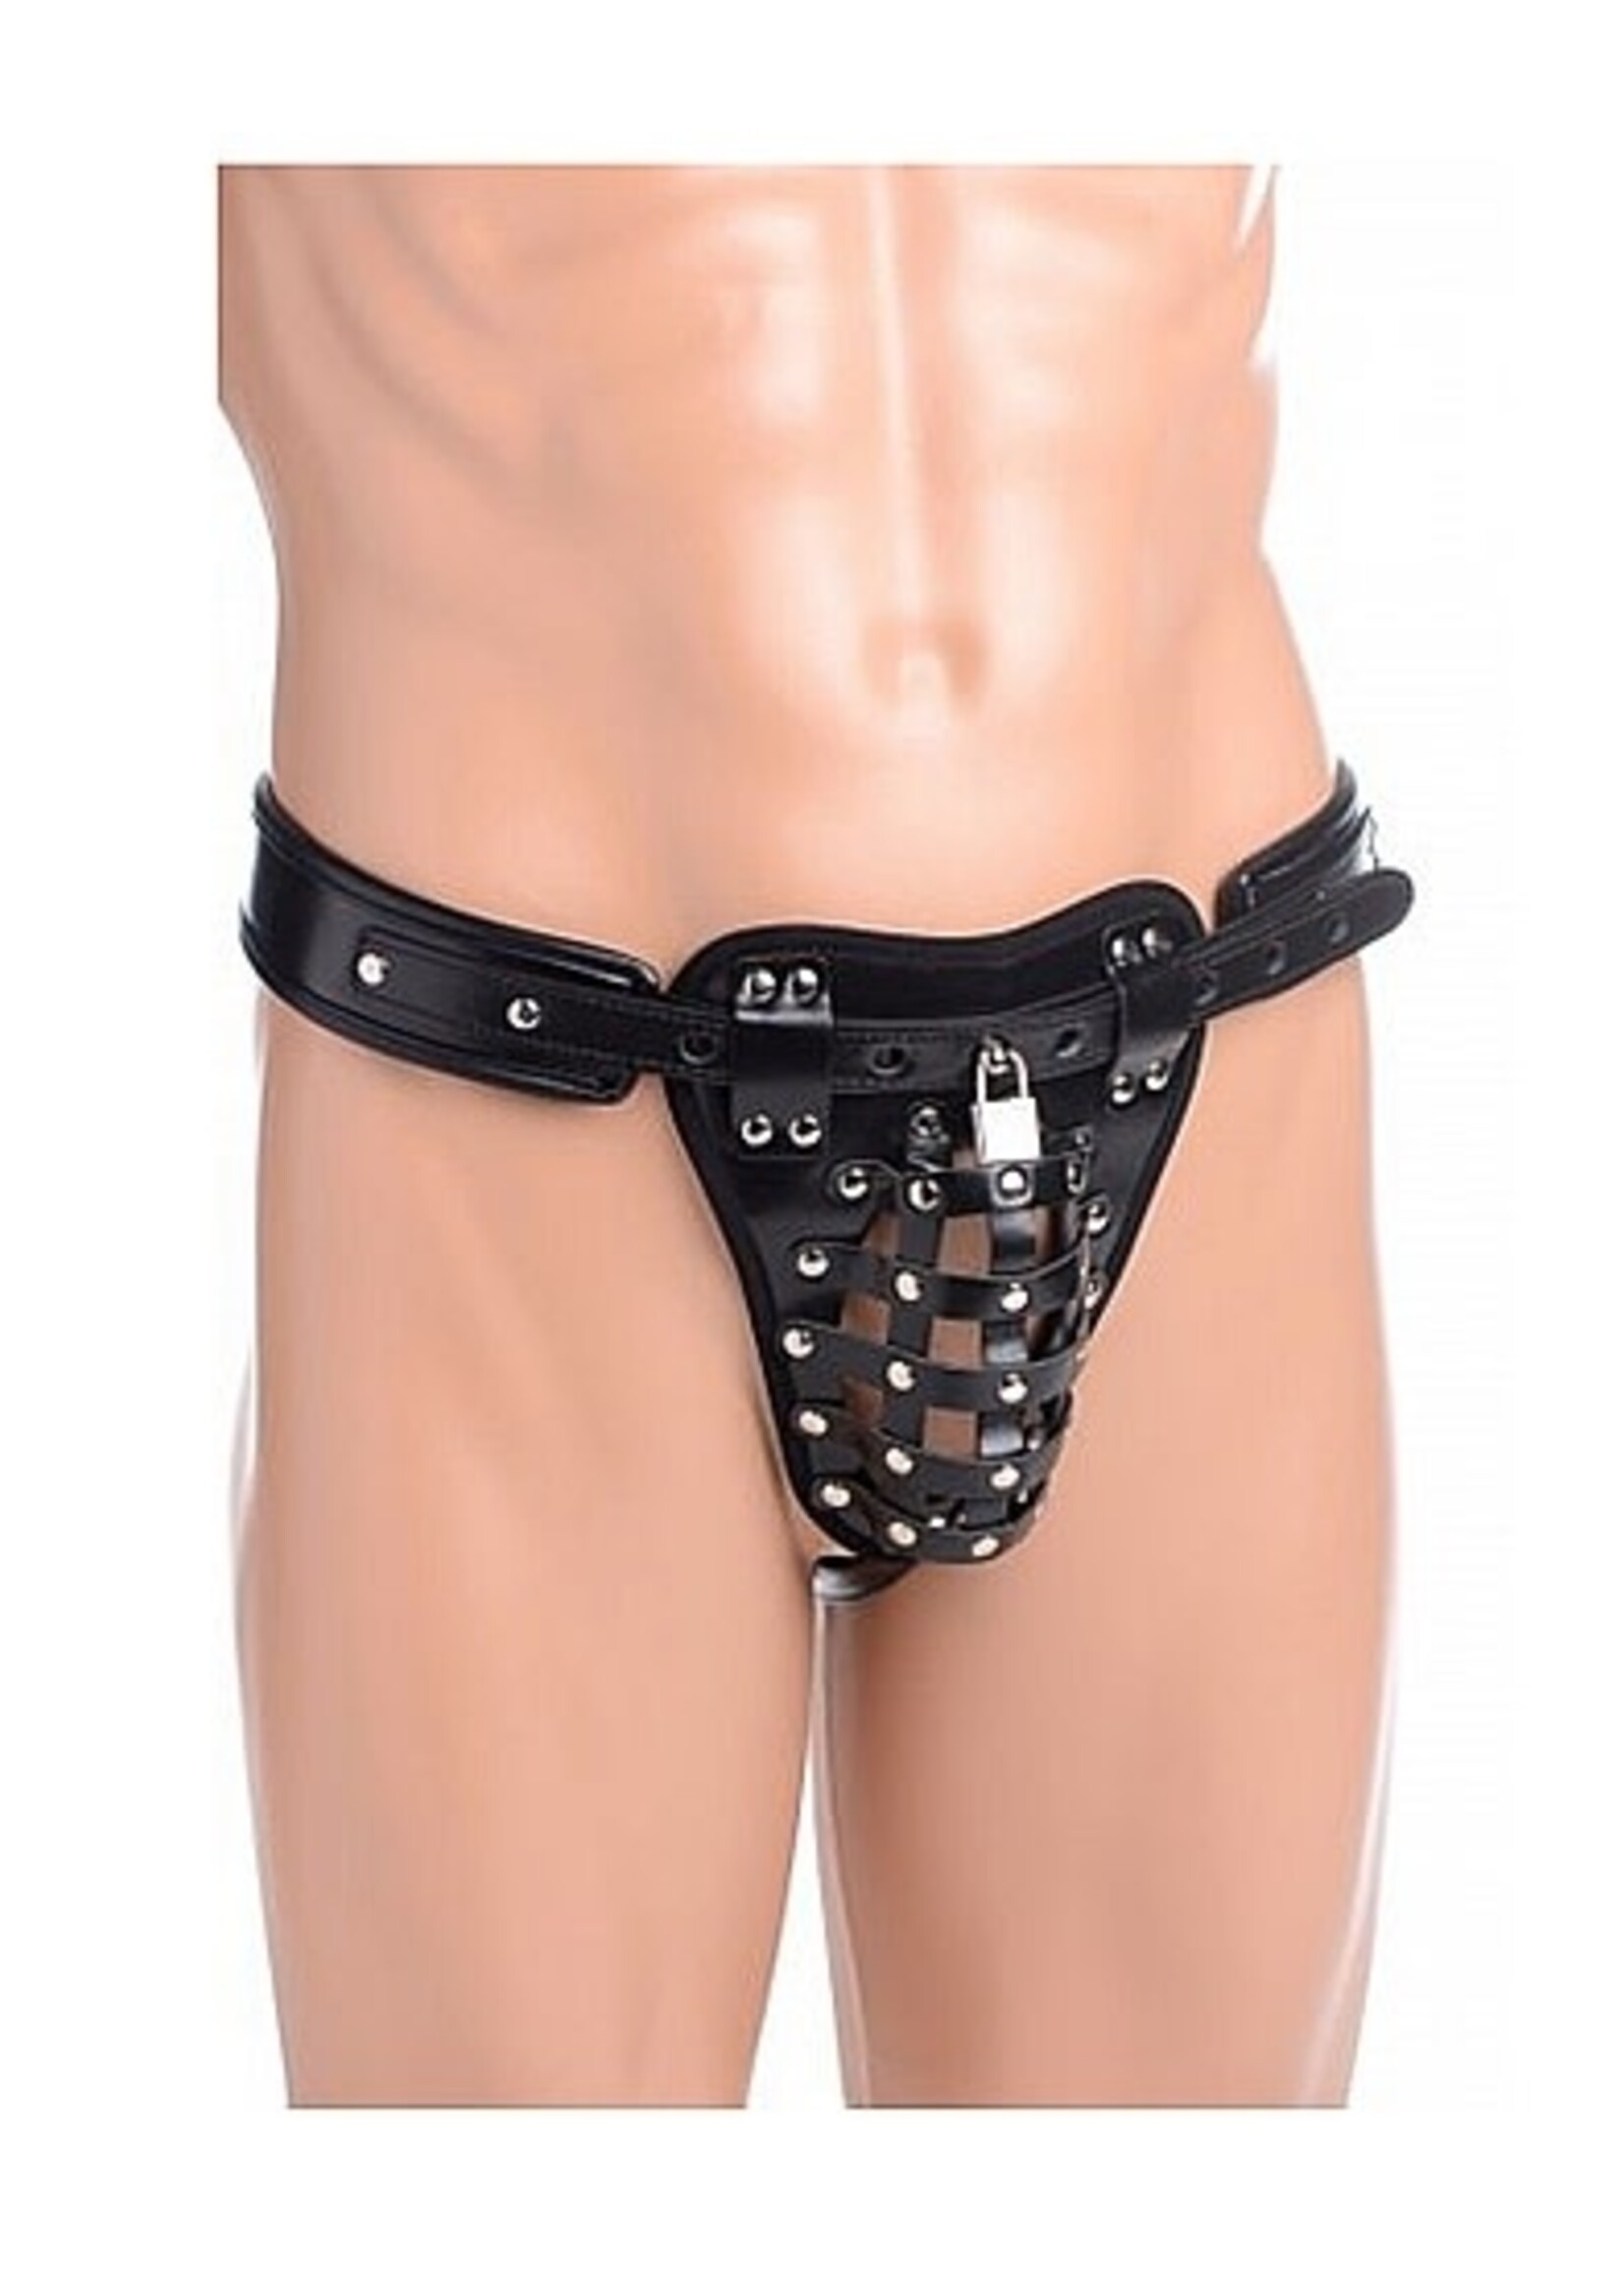 XR Brands Chastity belt male